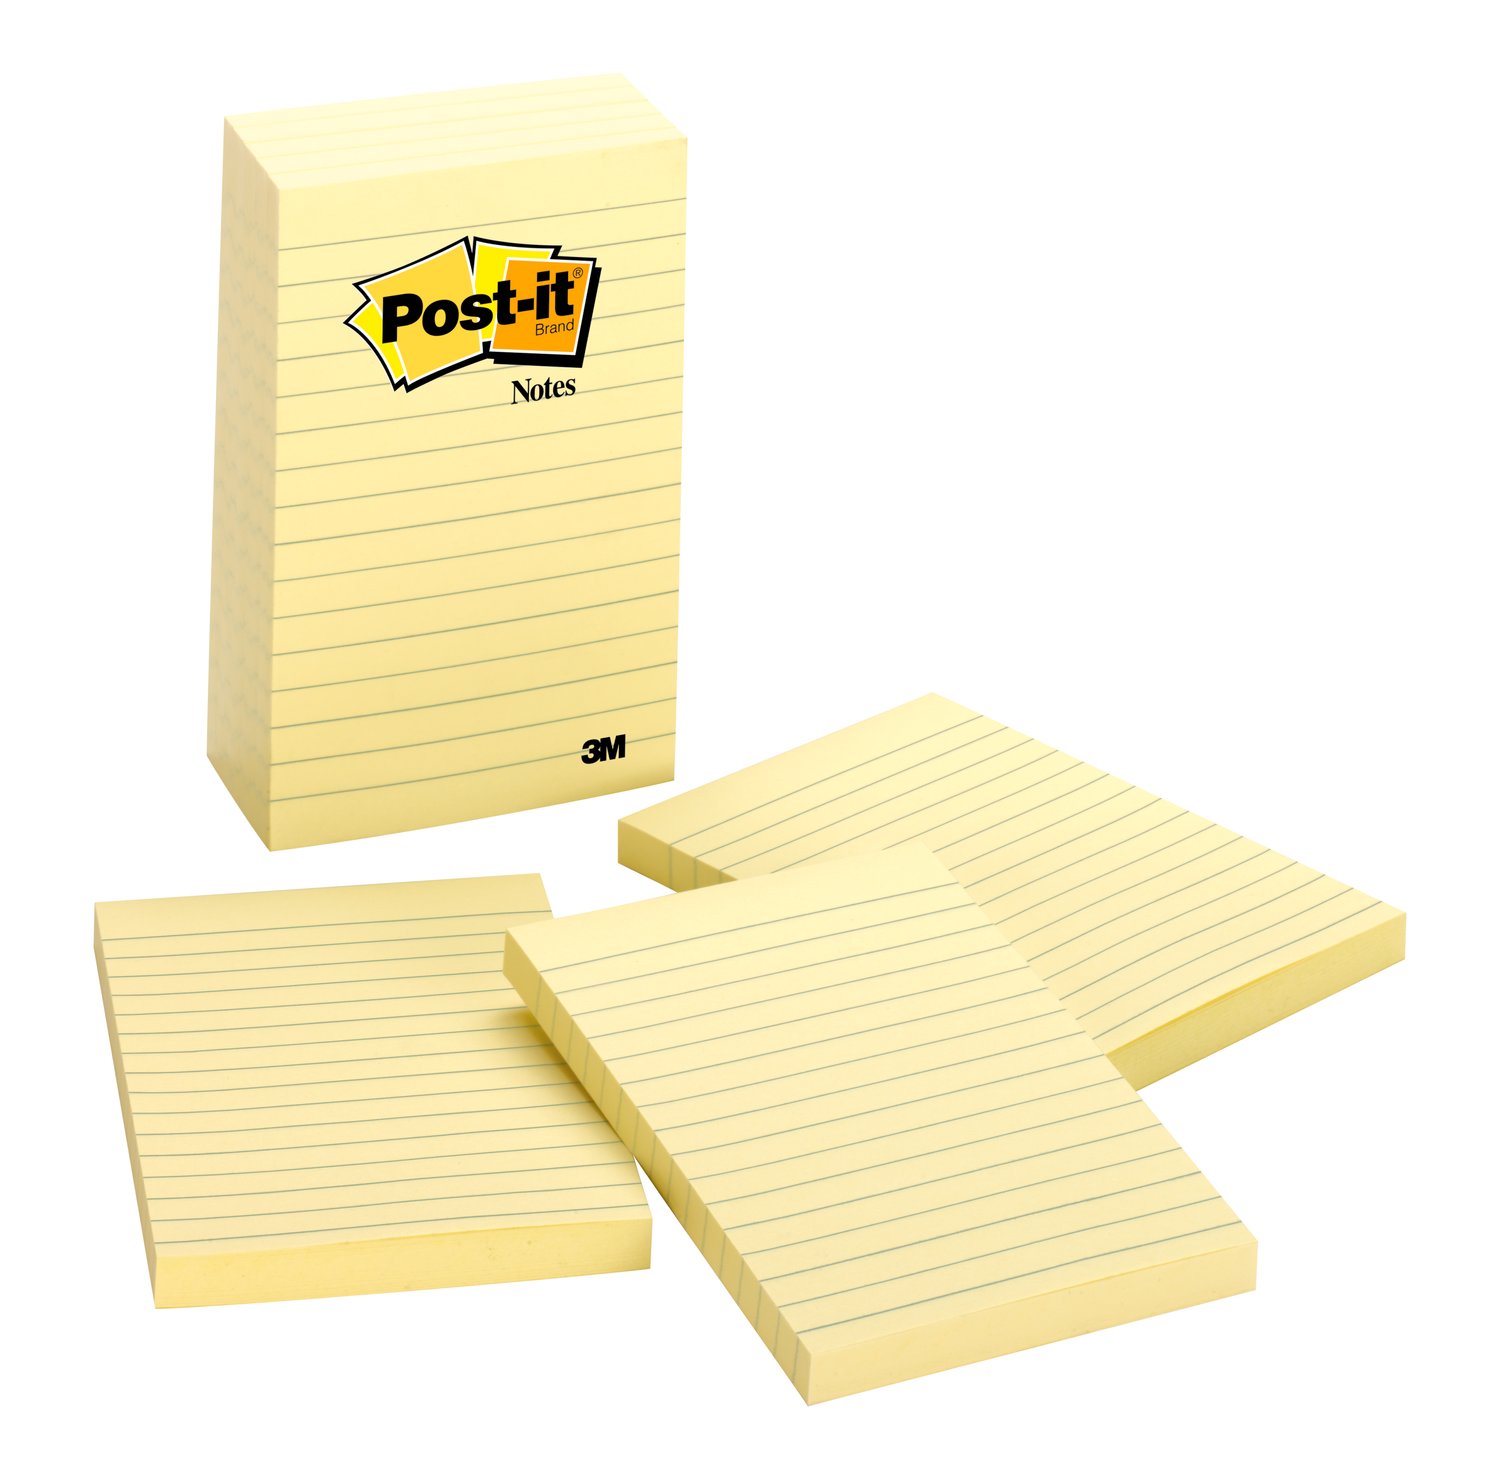 7100235628 - Post-it Notes 660-5pk, 4 in x 6 in x 100 shts (101 mm x 152 mm)